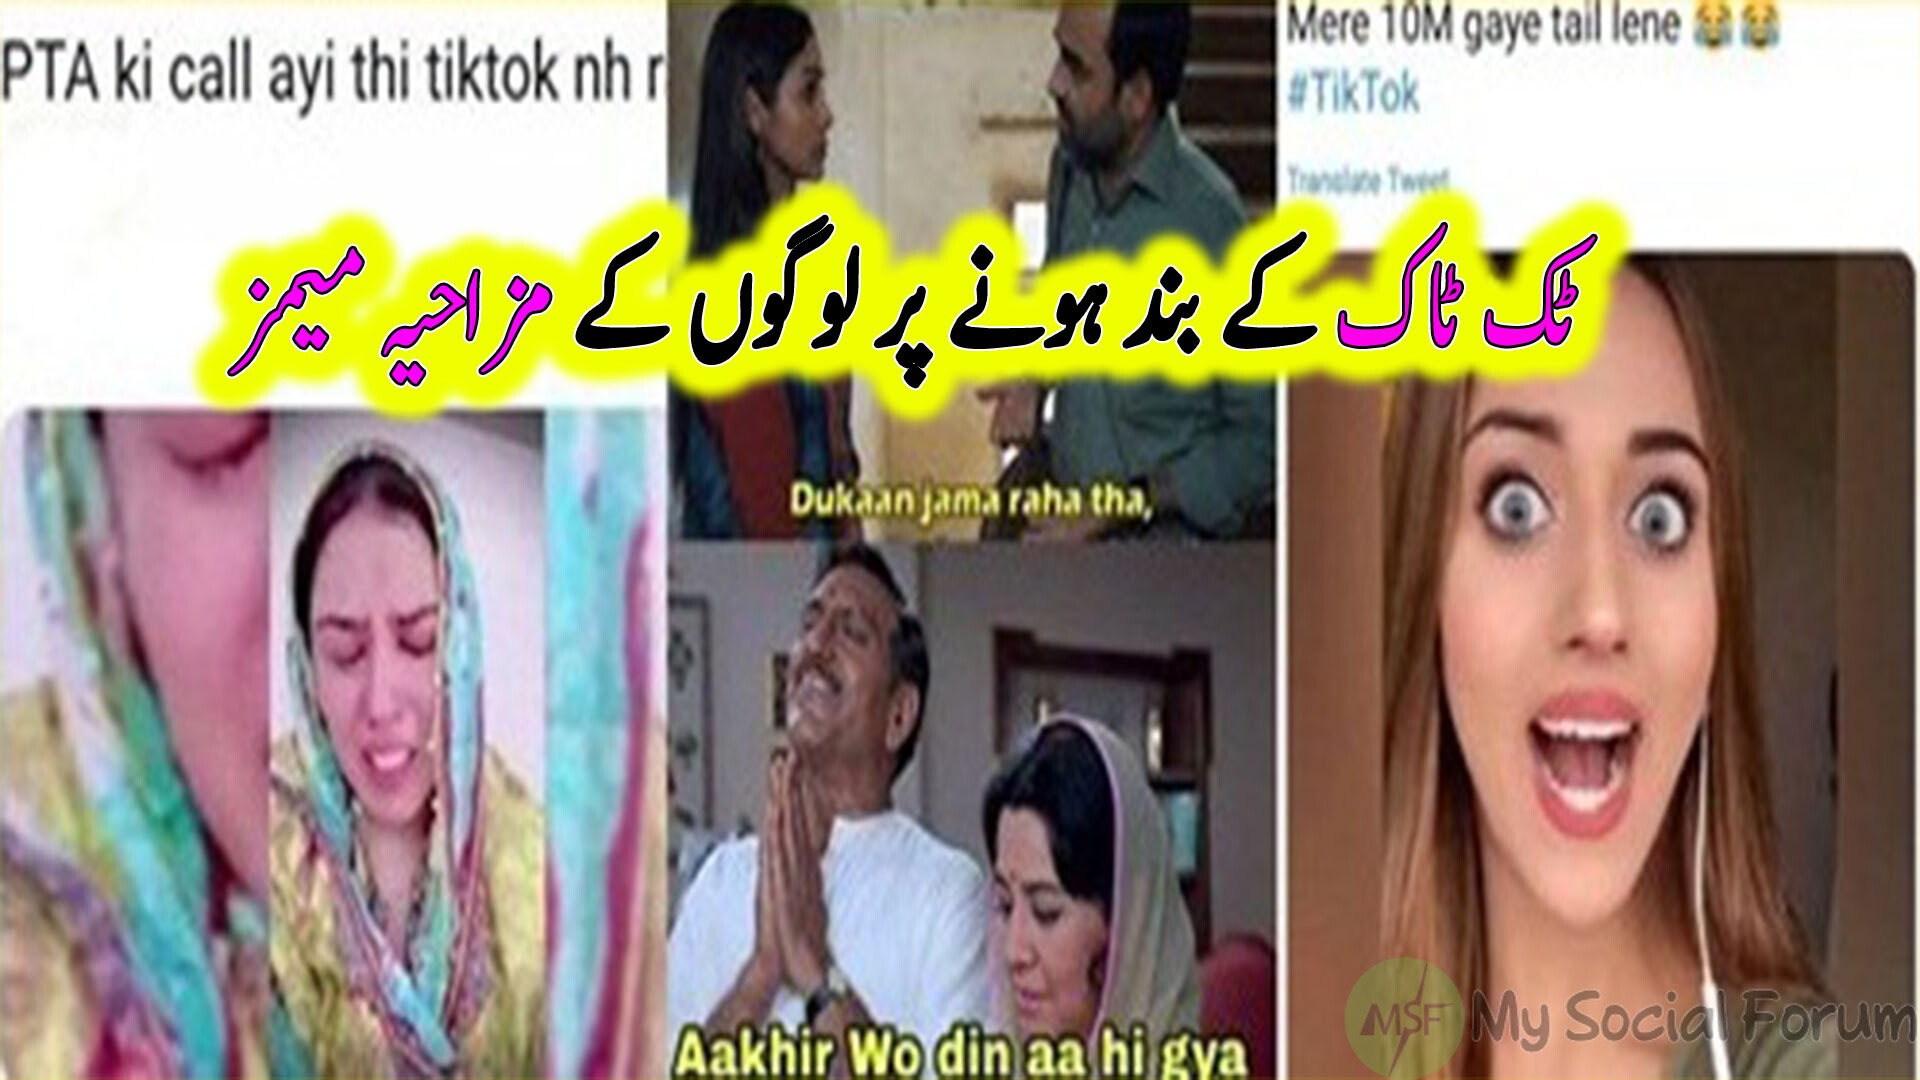 Funny Memes Reactions To The Tik Tok Ban In Pakistan